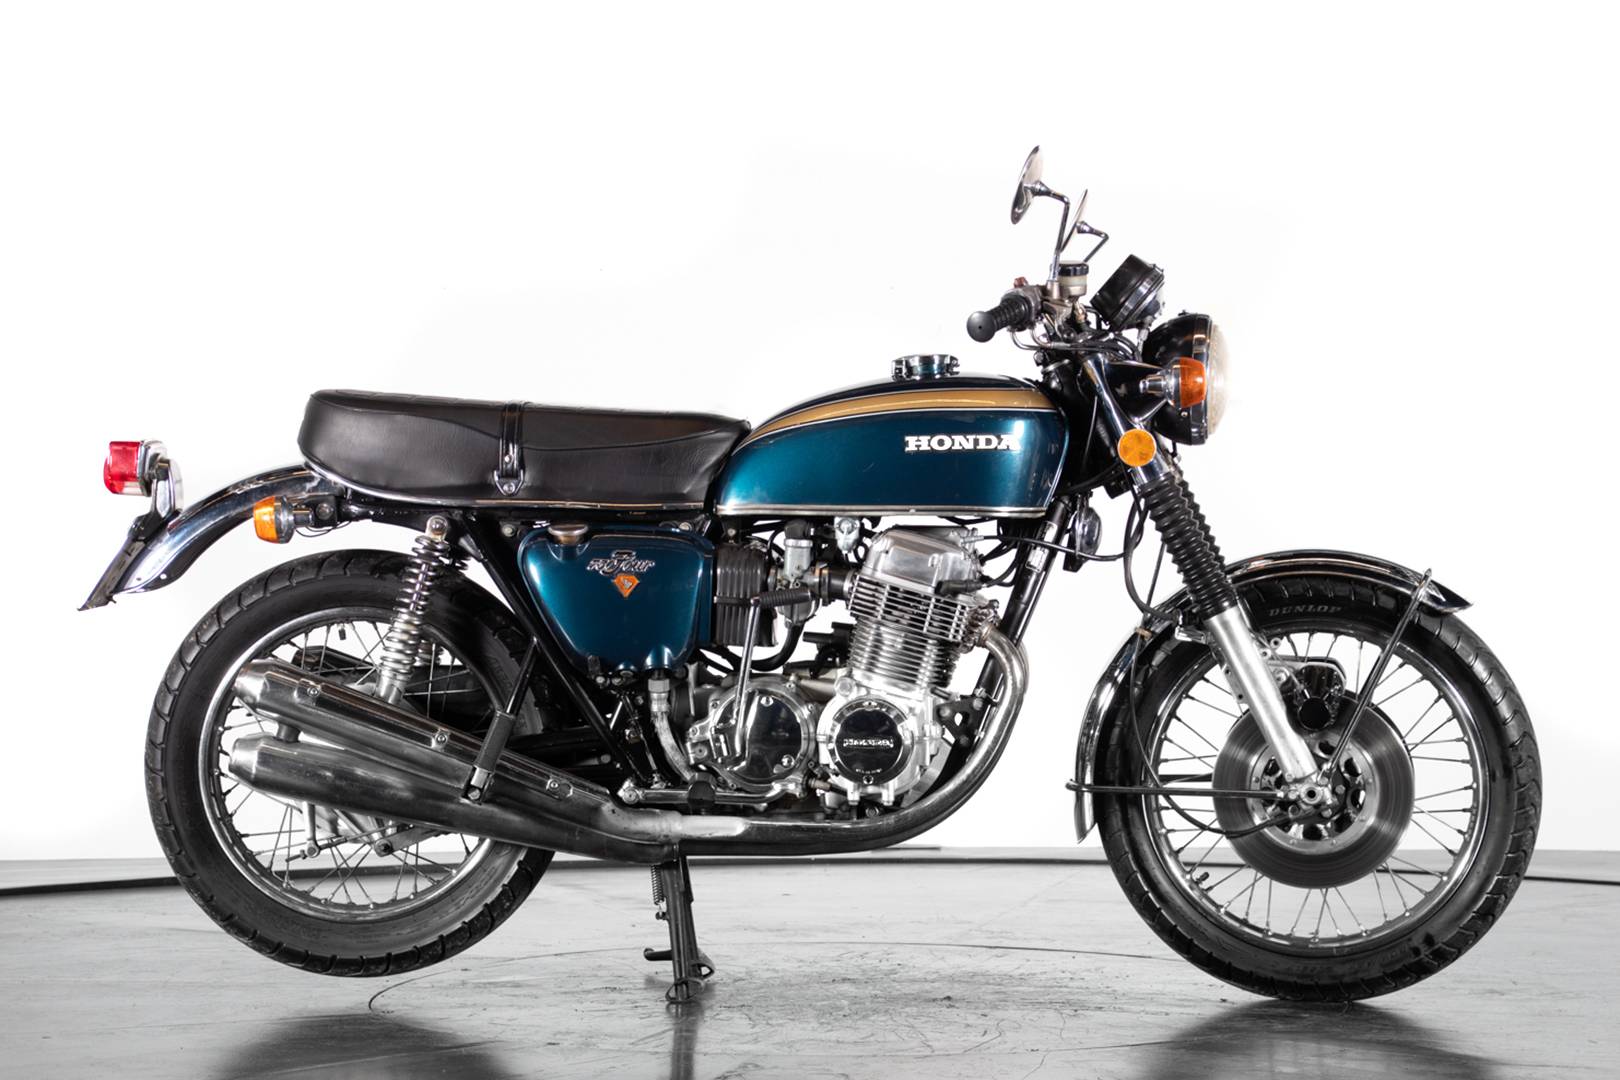 For Sale Honda CB 750 Four (1973) offered for AUD 16,755